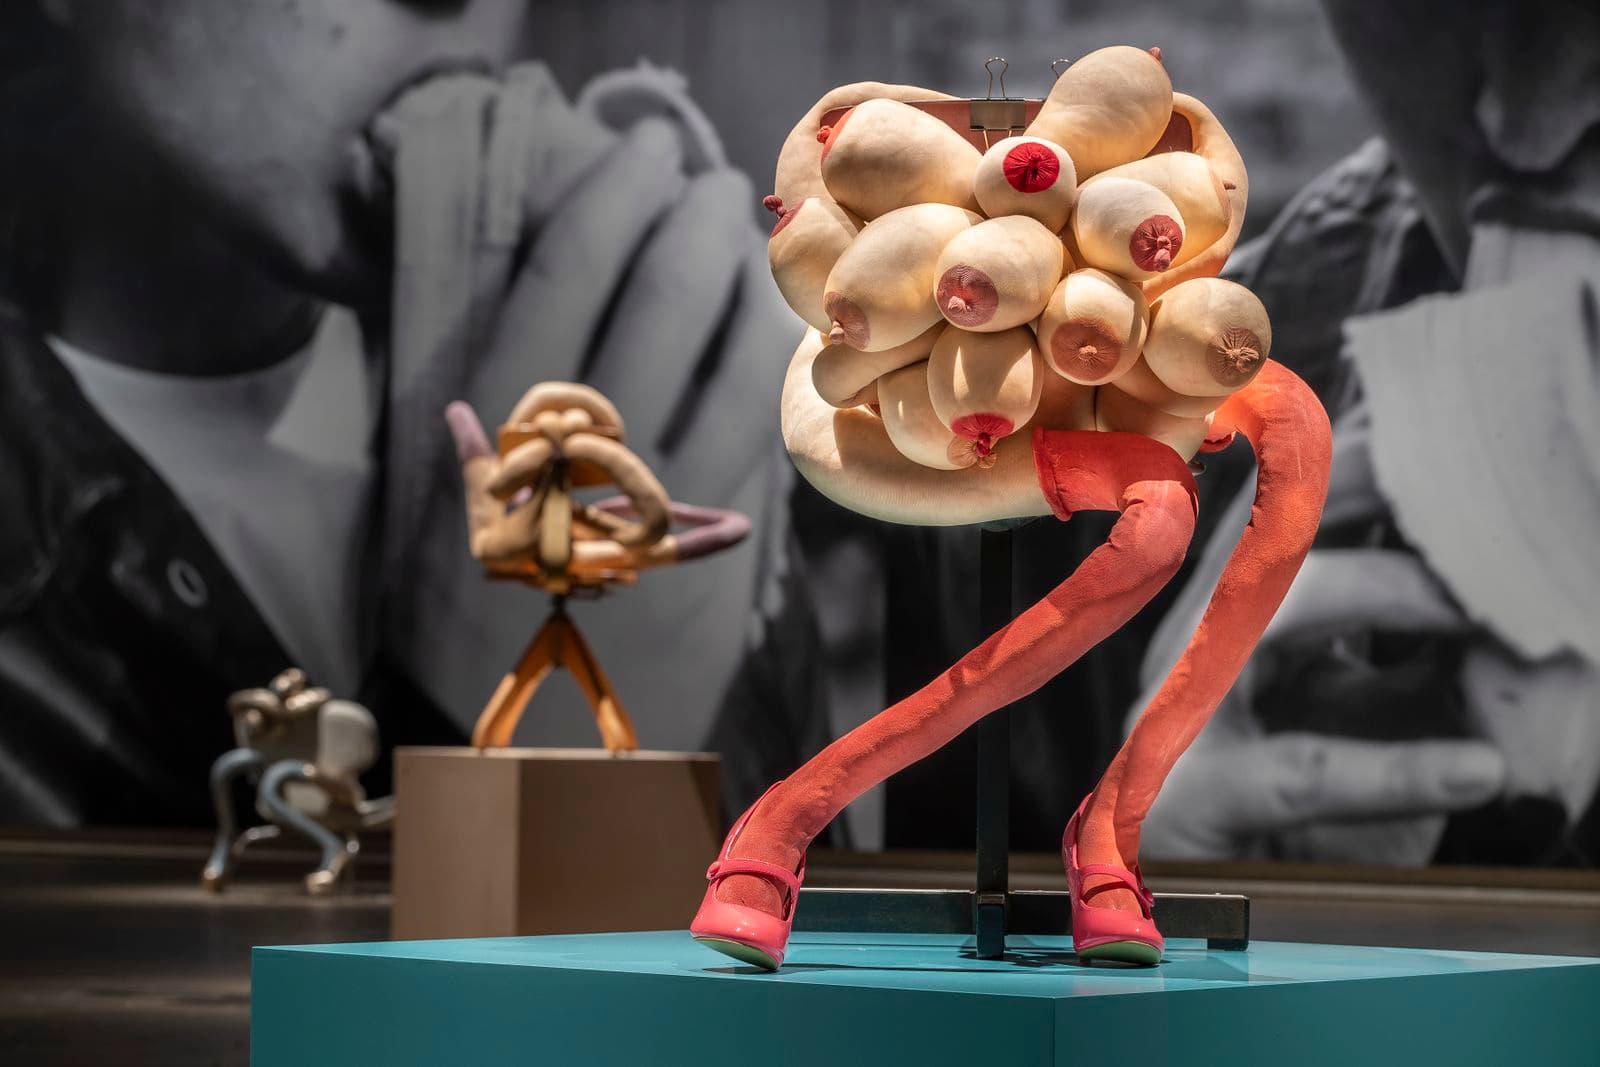 Installation view of a sculpture of a human-like form made up of a cluster of many breasts and two long legs with long pink socks, sitting on a chair